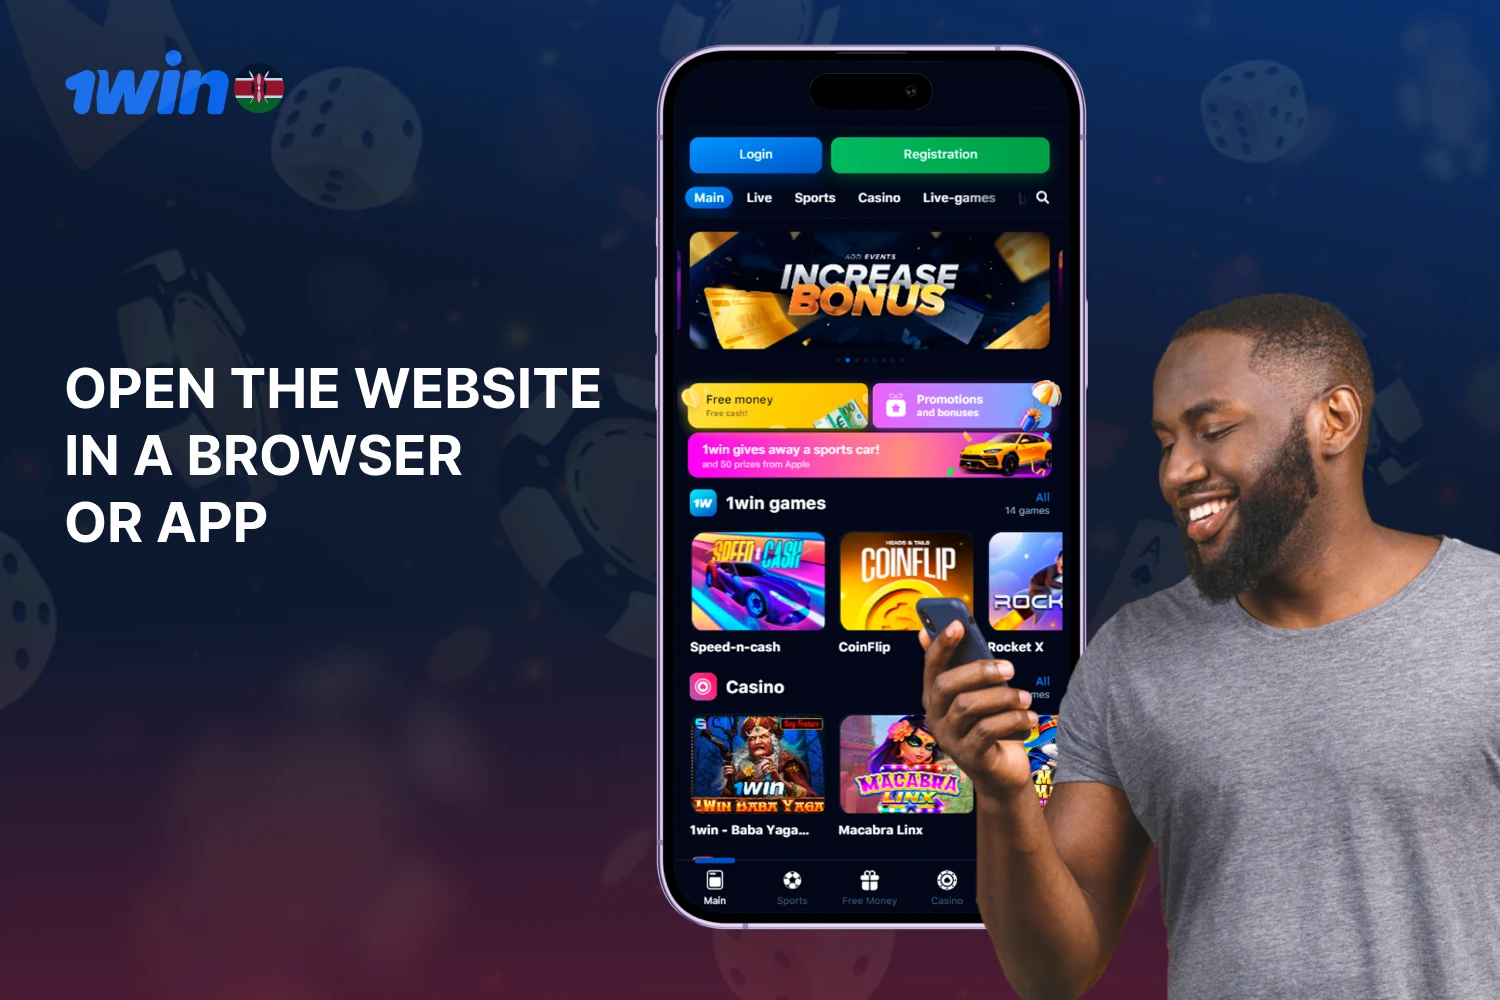 To place a bet with 1win Kenya, open the website in a browser or application